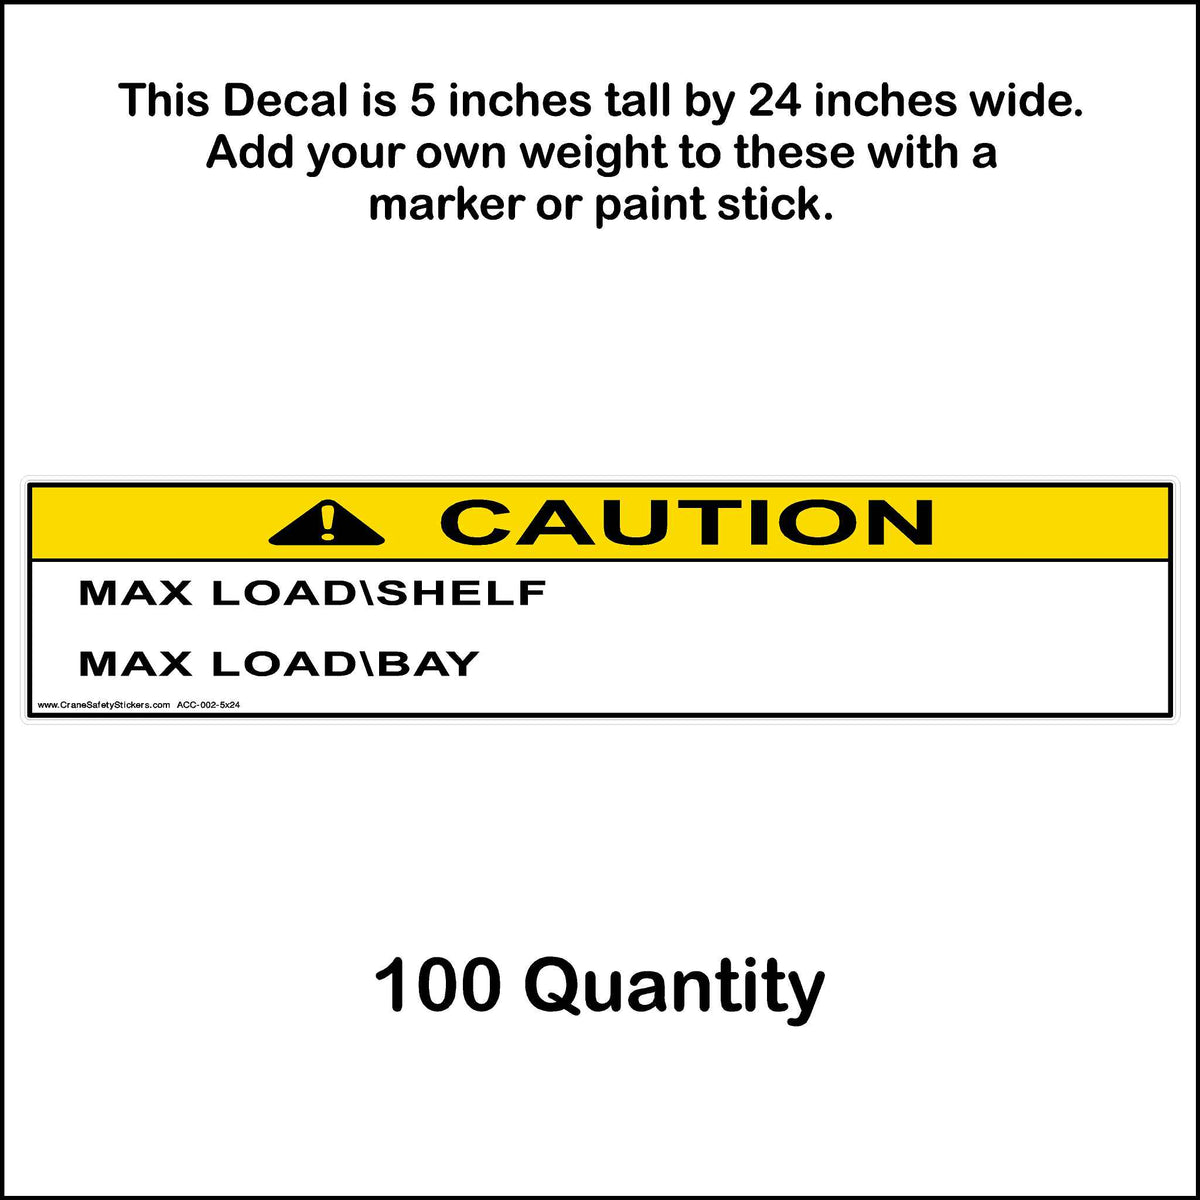 5 inches by 24 inches maximum load shelf and maximum load bay sticker 100 quantity.